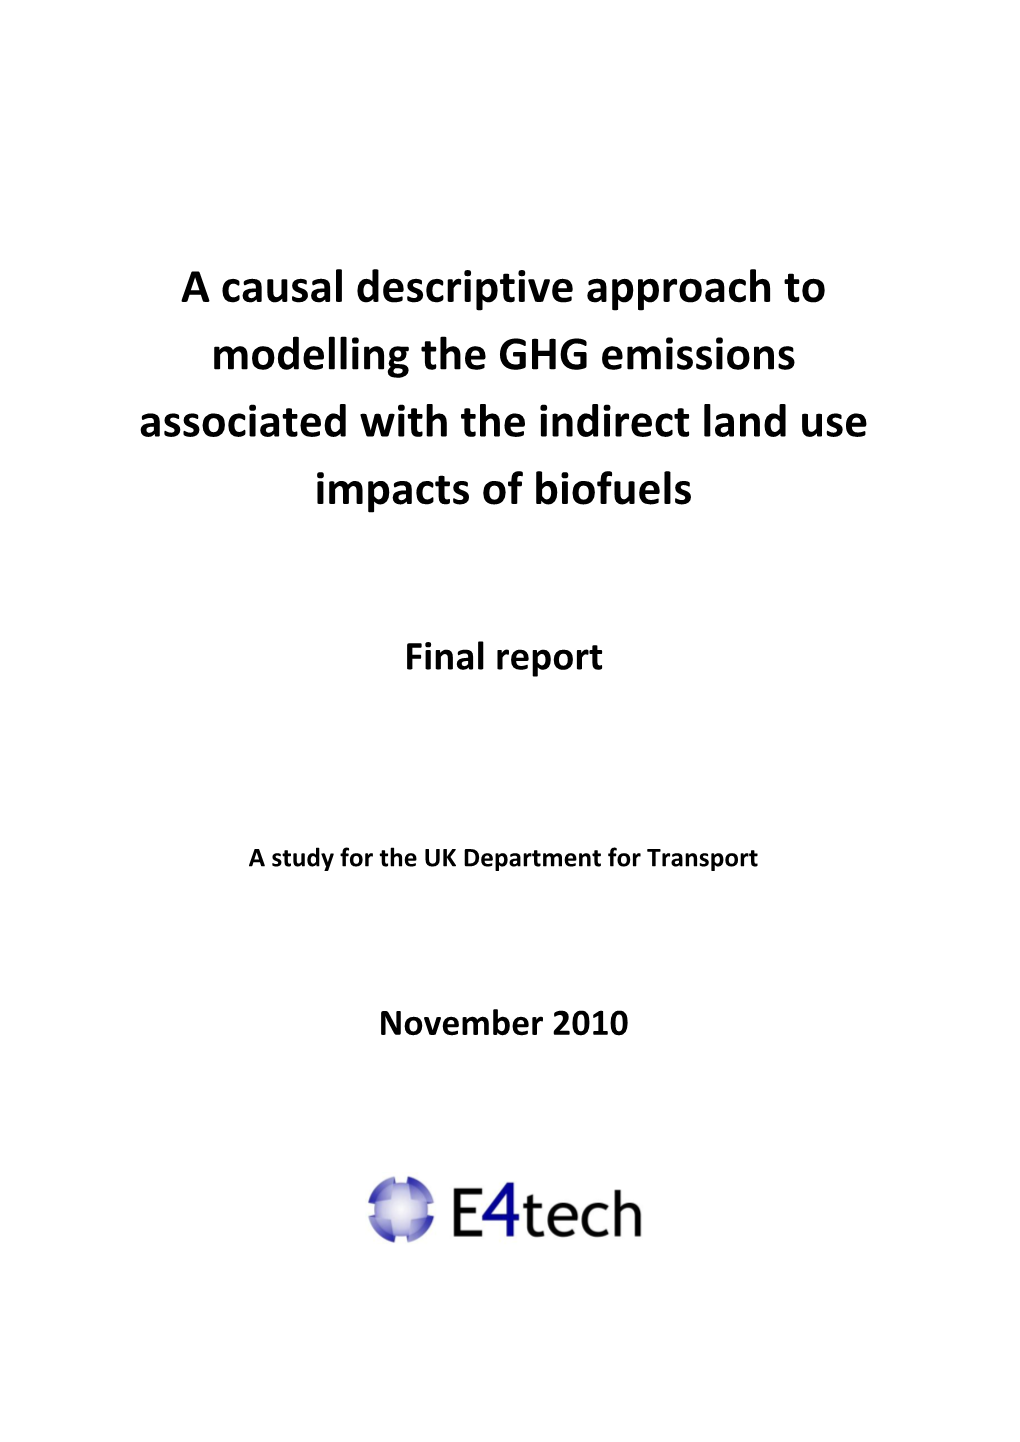 A Causal Descriptive Approach to Modelling the GHG Emissions Associated with the Indirect Land Use Impacts of Biofuels